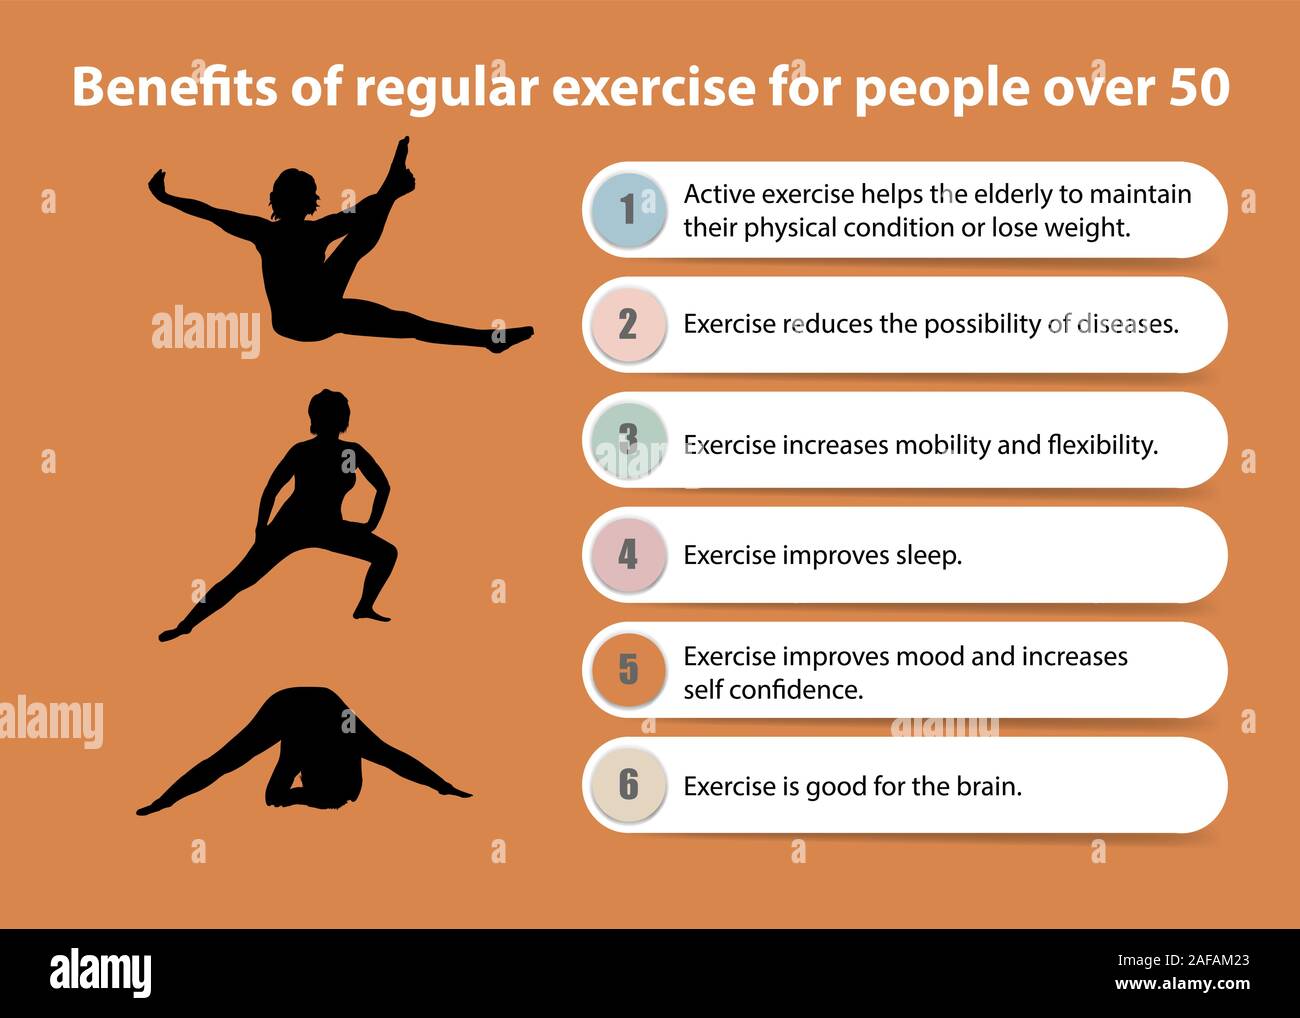 https://c8.alamy.com/comp/2AFAM23/benefits-of-regular-exercise-for-people-over-50-presentation-silhouette-of-woman-fitness-exercising-2AFAM23.jpg